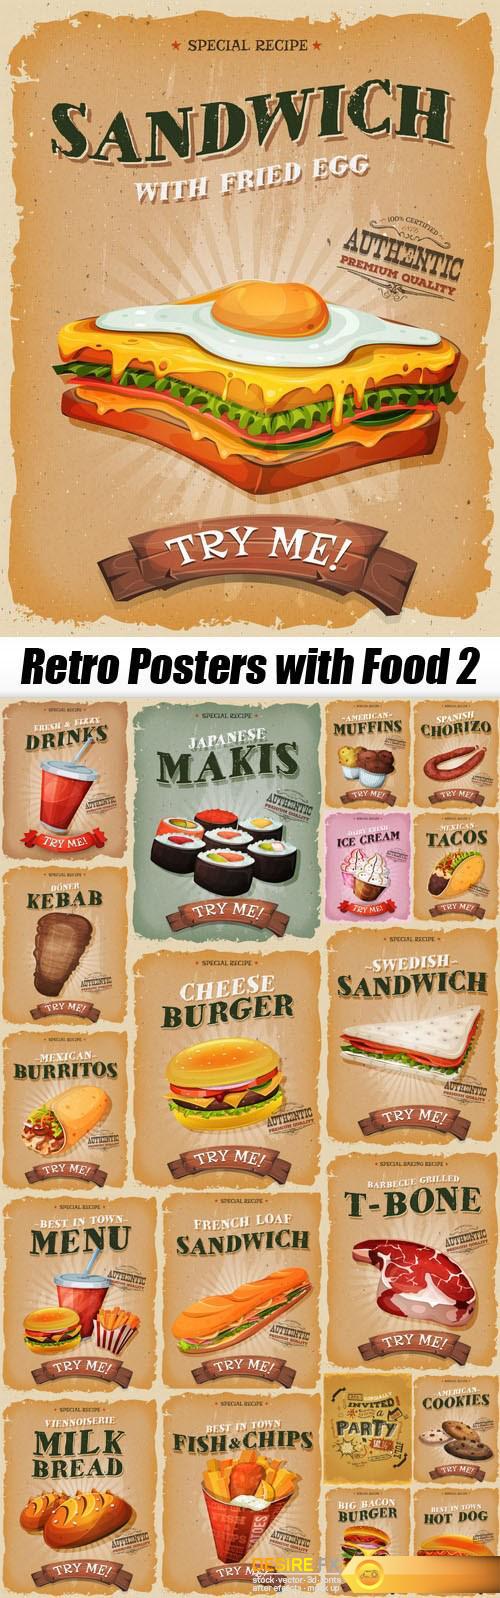 Retro Posters with Food 2 